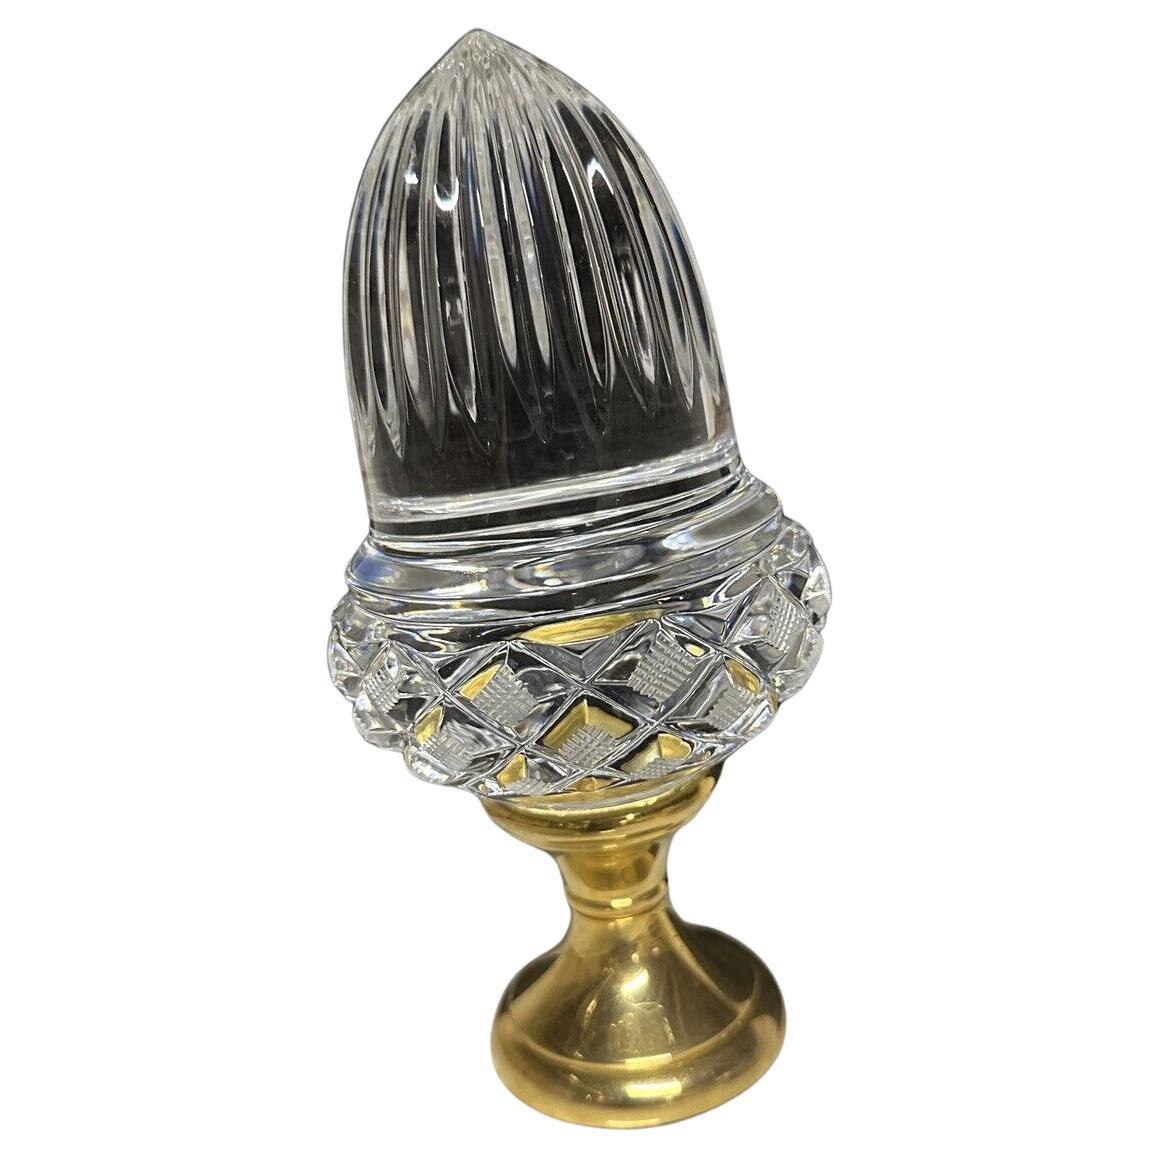 Etched Wonderful Crystal Acorn Cut Faceted Glass Brass Banister Newel Post Finial